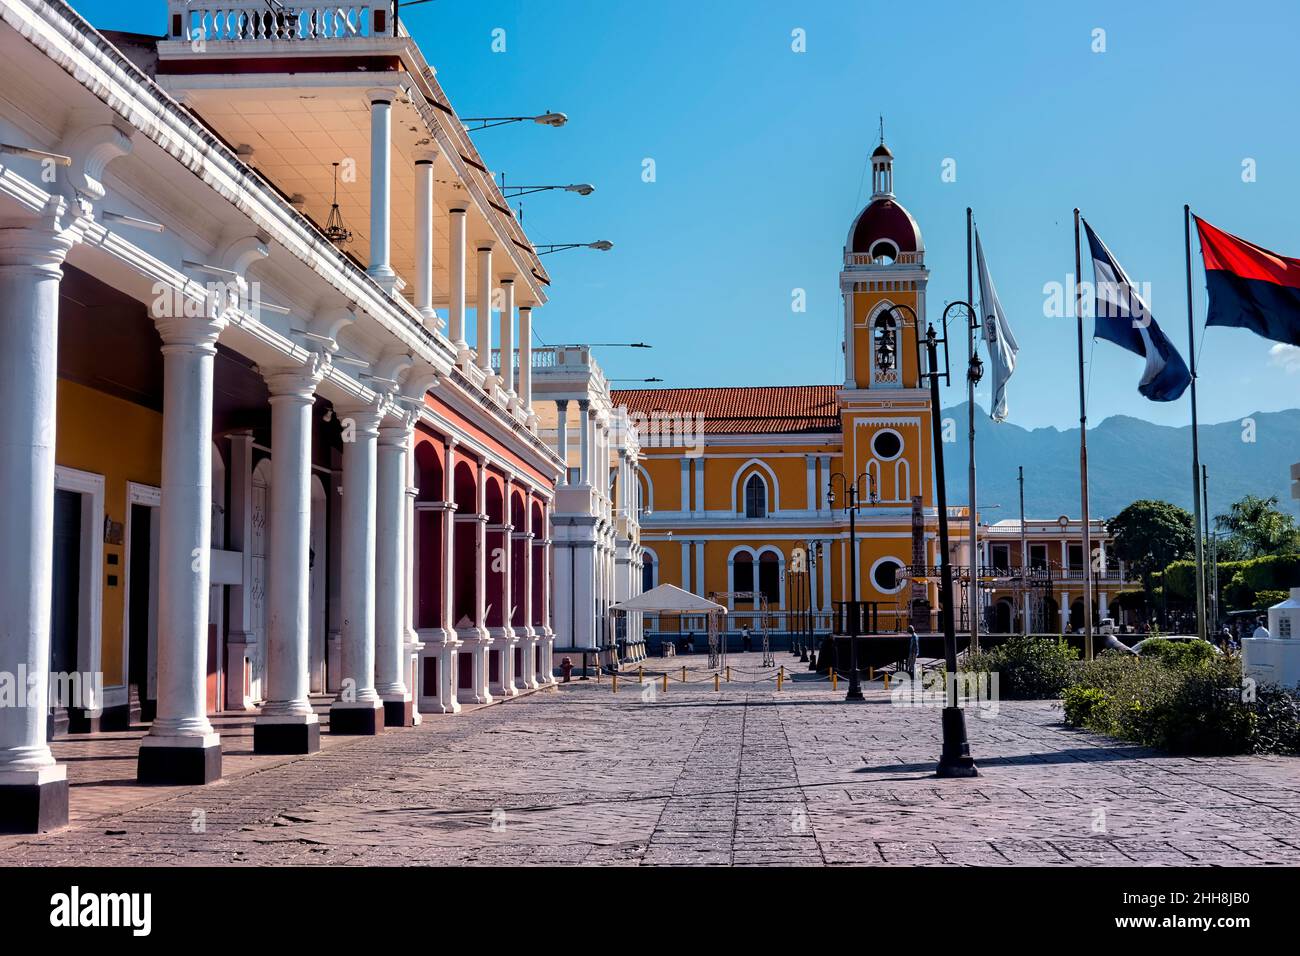 The beautiful neoclassical Granada Cathedral (Our Lady of the Assumption), and central plaza, Granada, Nicaragua Stock Photo